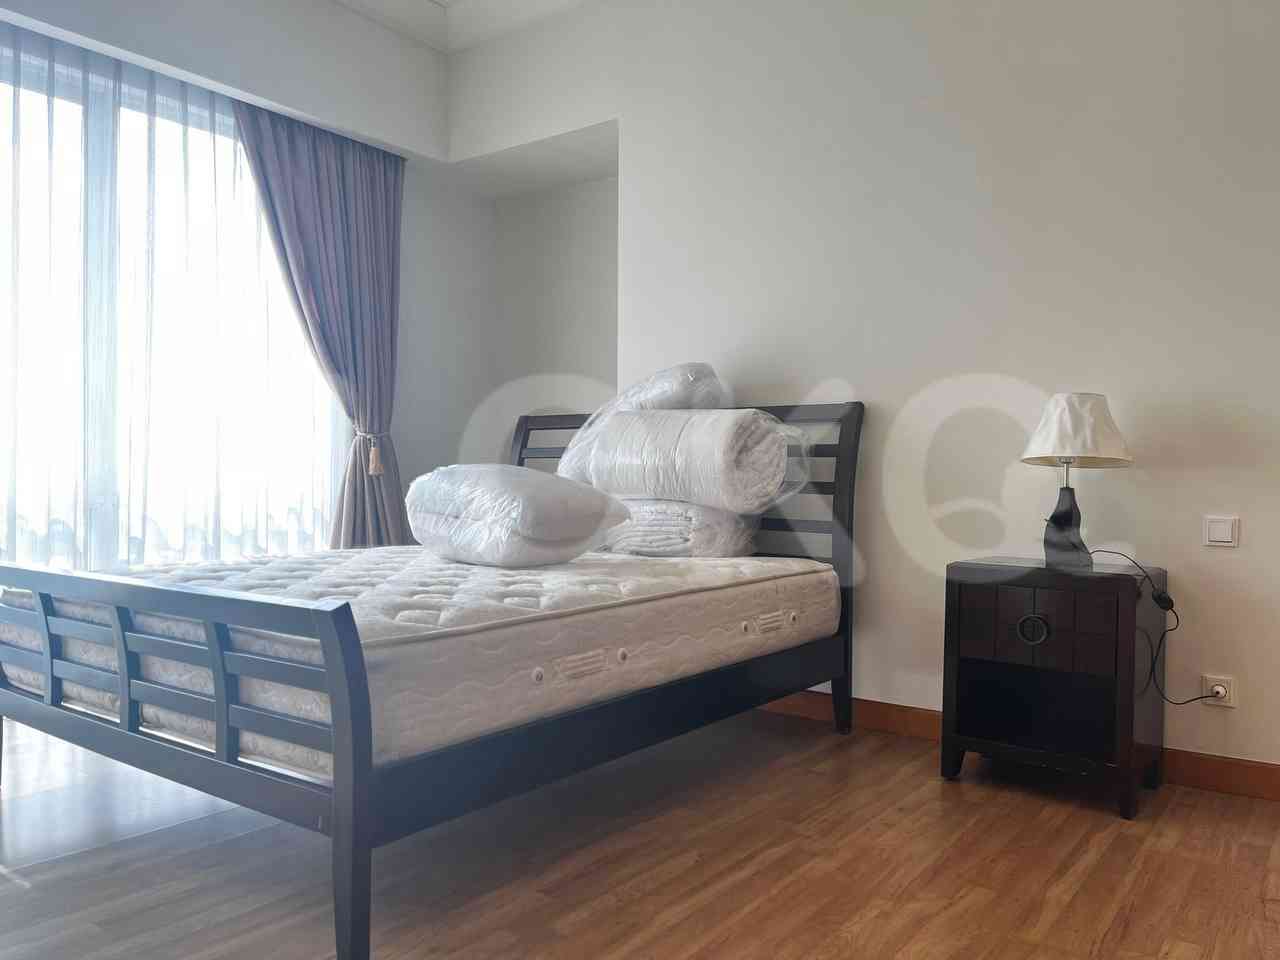 2 Bedroom on 9th Floor for Rent in Pakubuwono Residence - fgab86 3